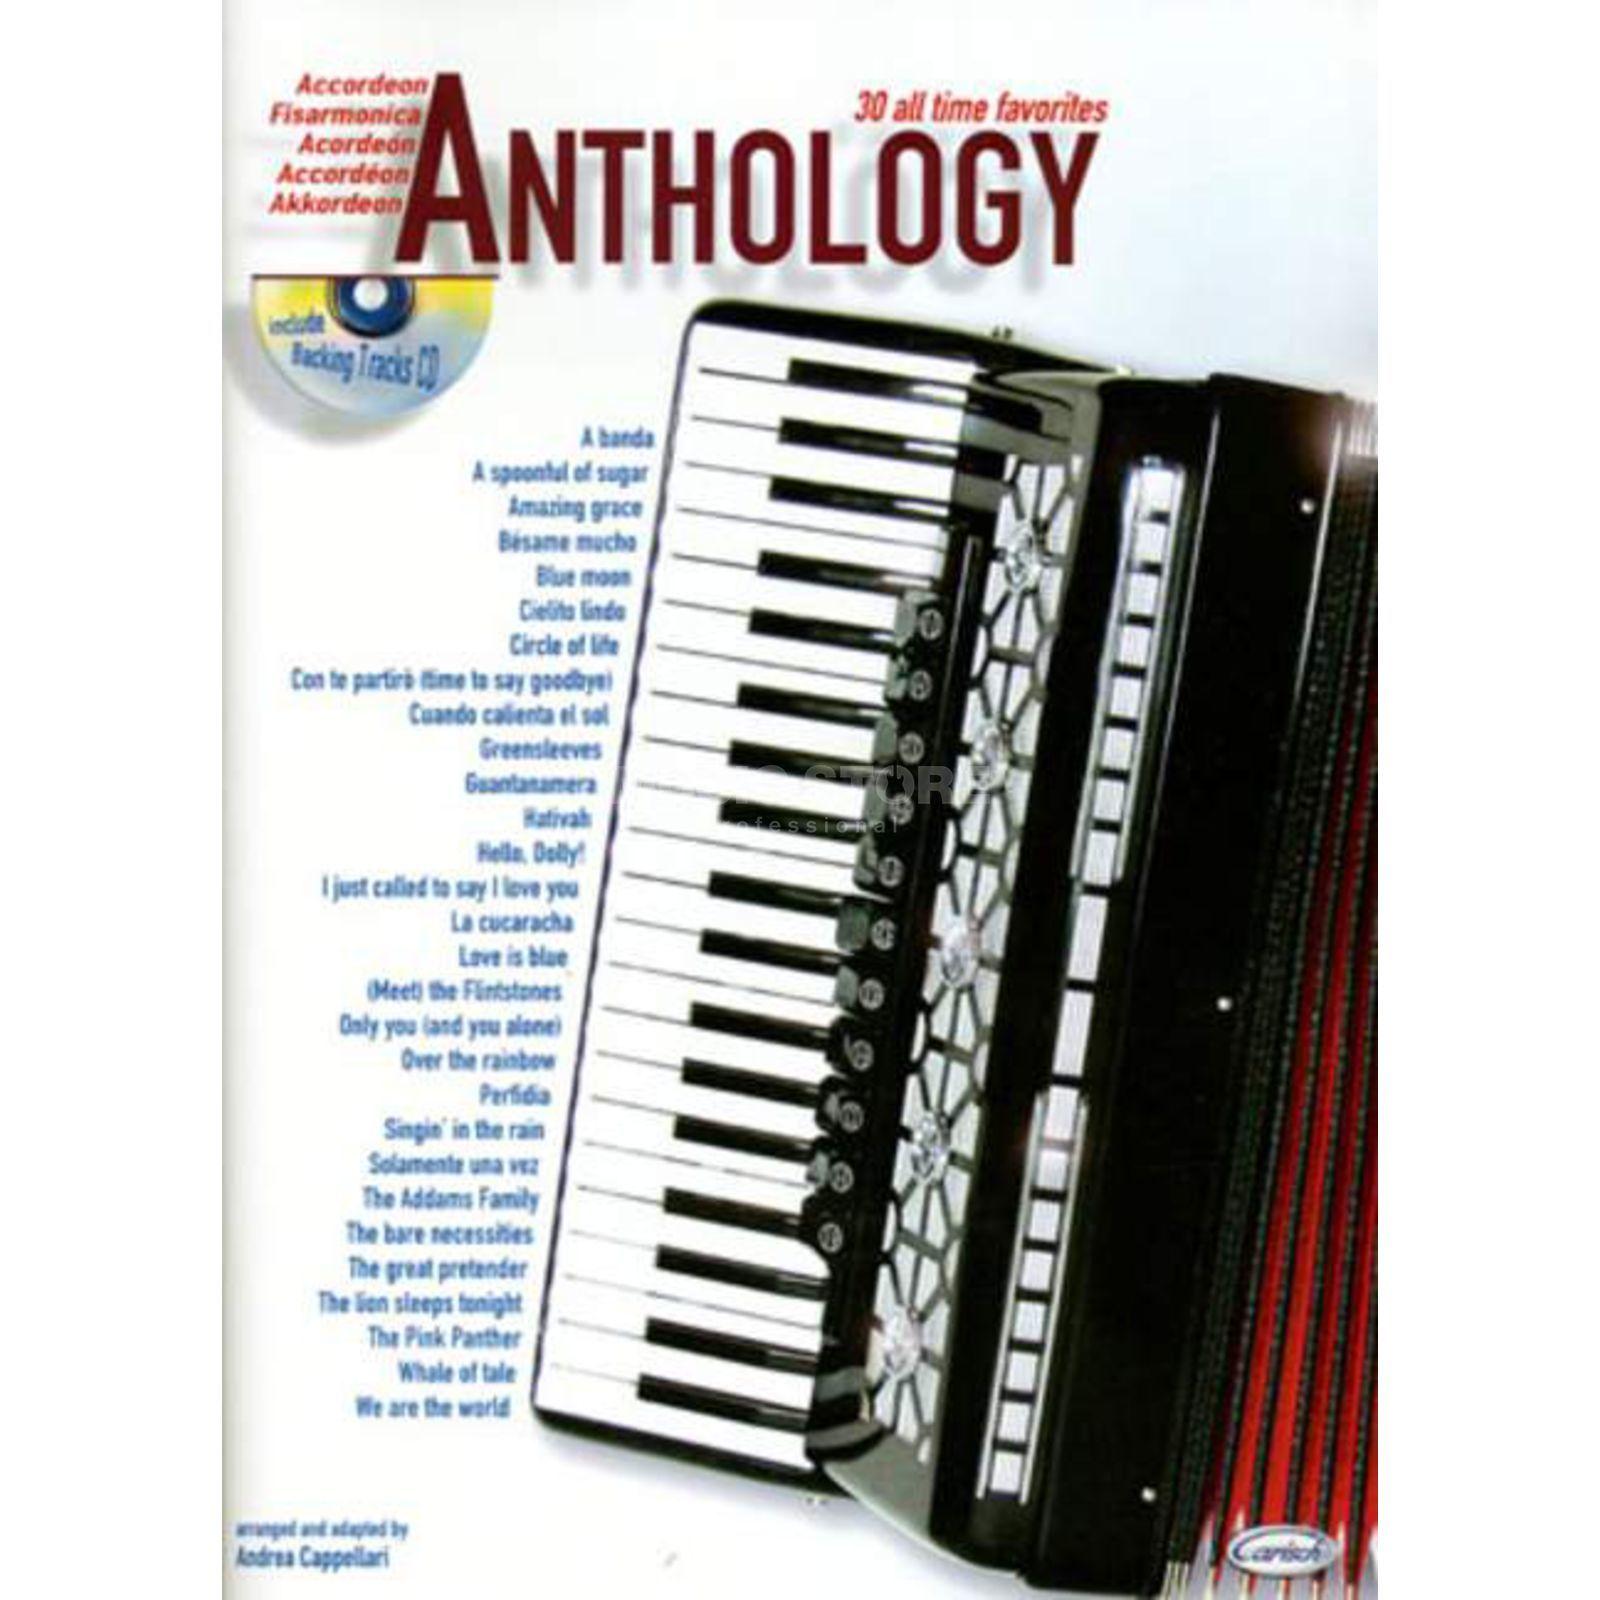 Anthology 30 all time favorites Fisarmonica - Carisch